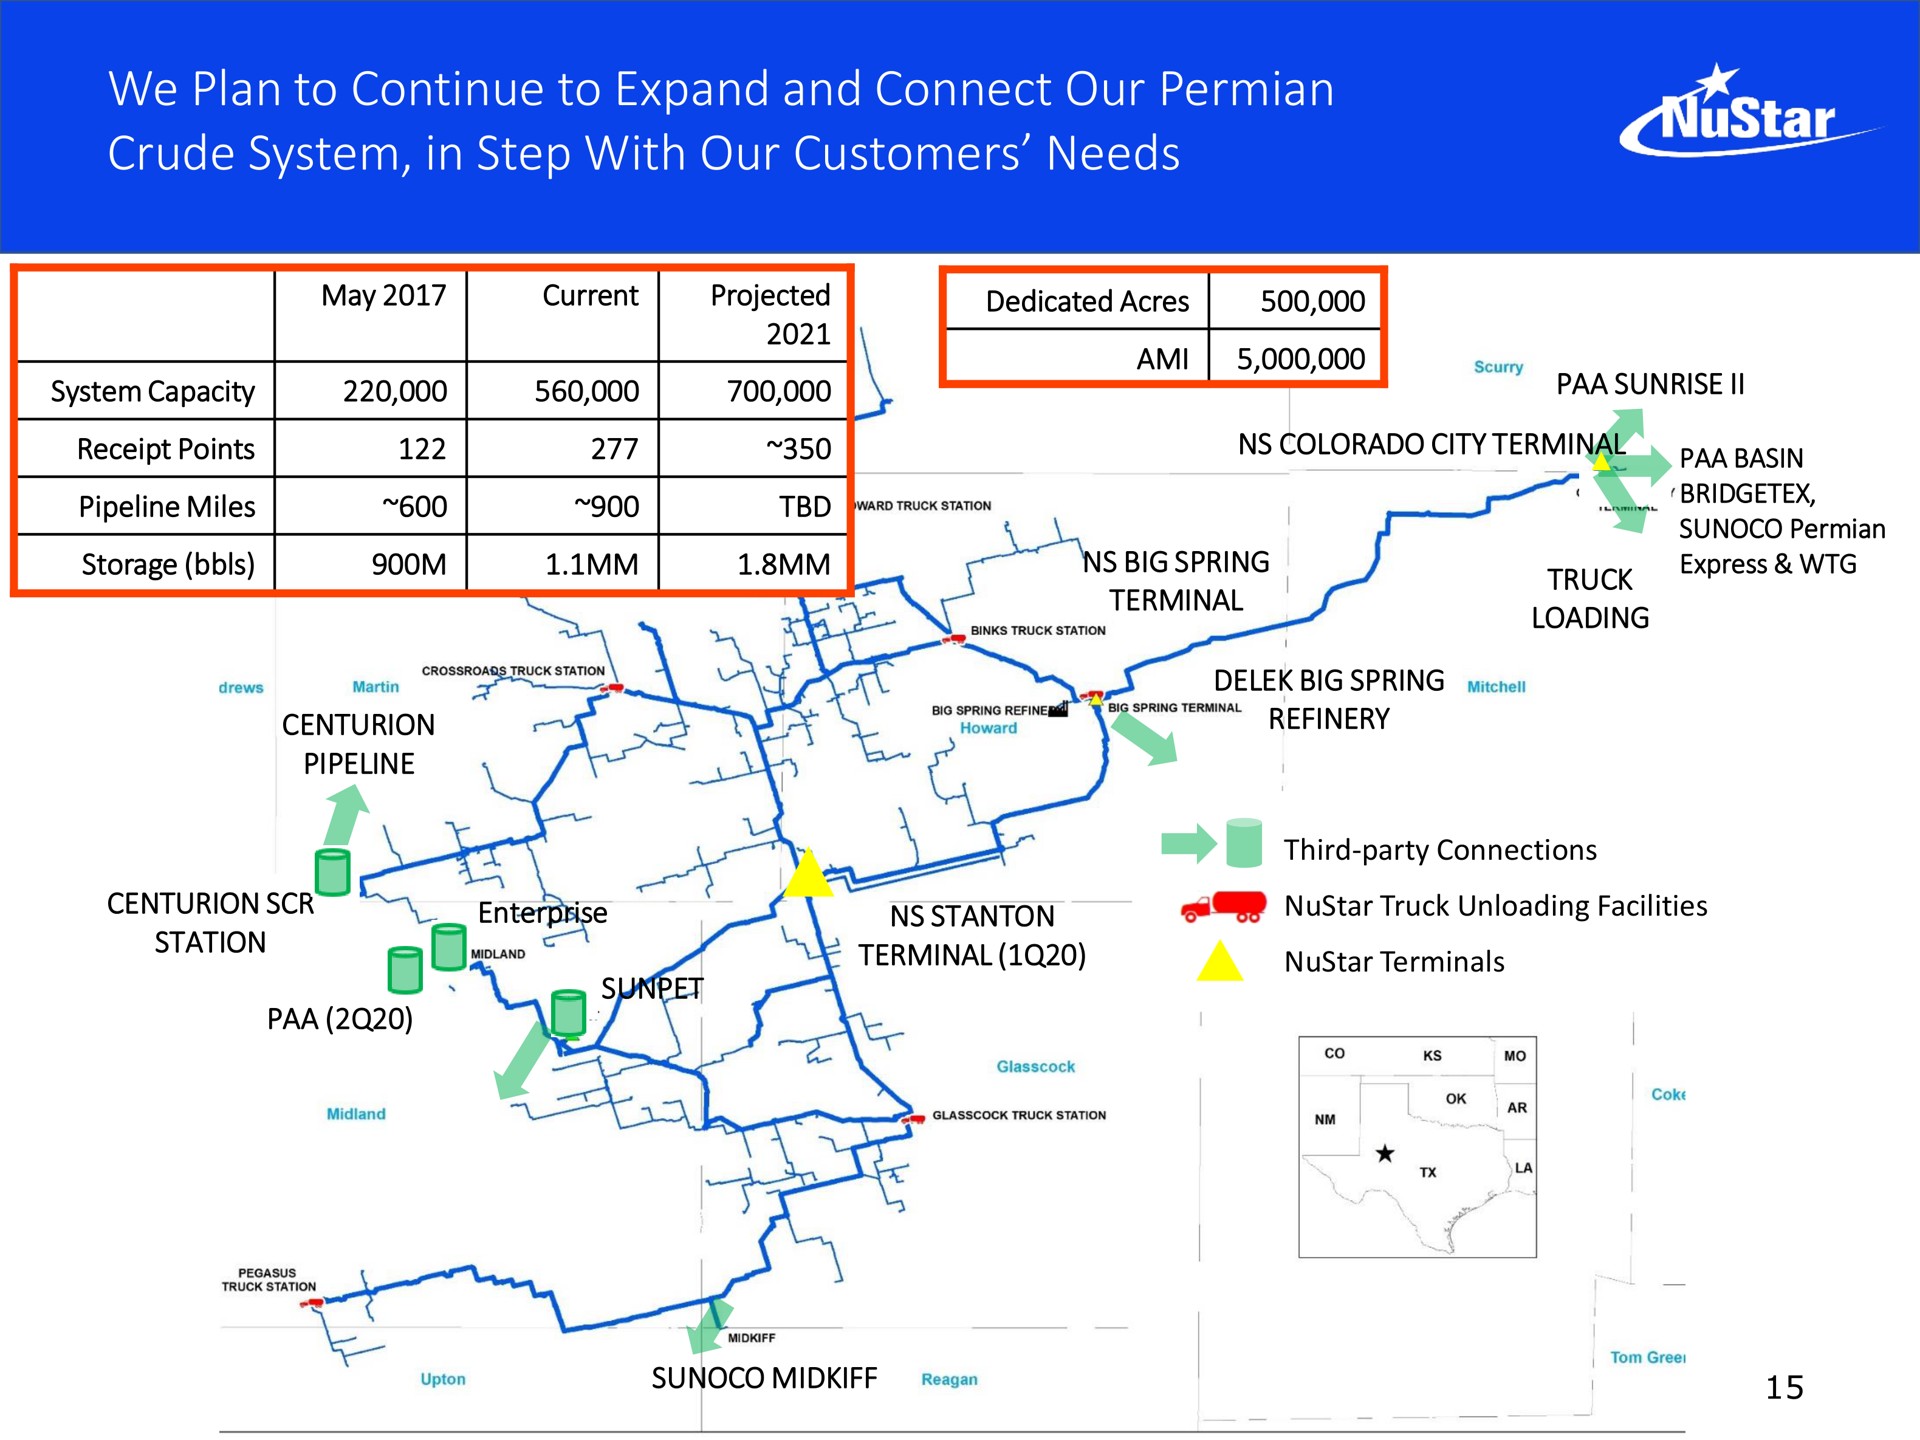 we plan to continue to expand and connect our crude system in step with our customers needs teen colorado city terminal baa basin | NuStar Energy